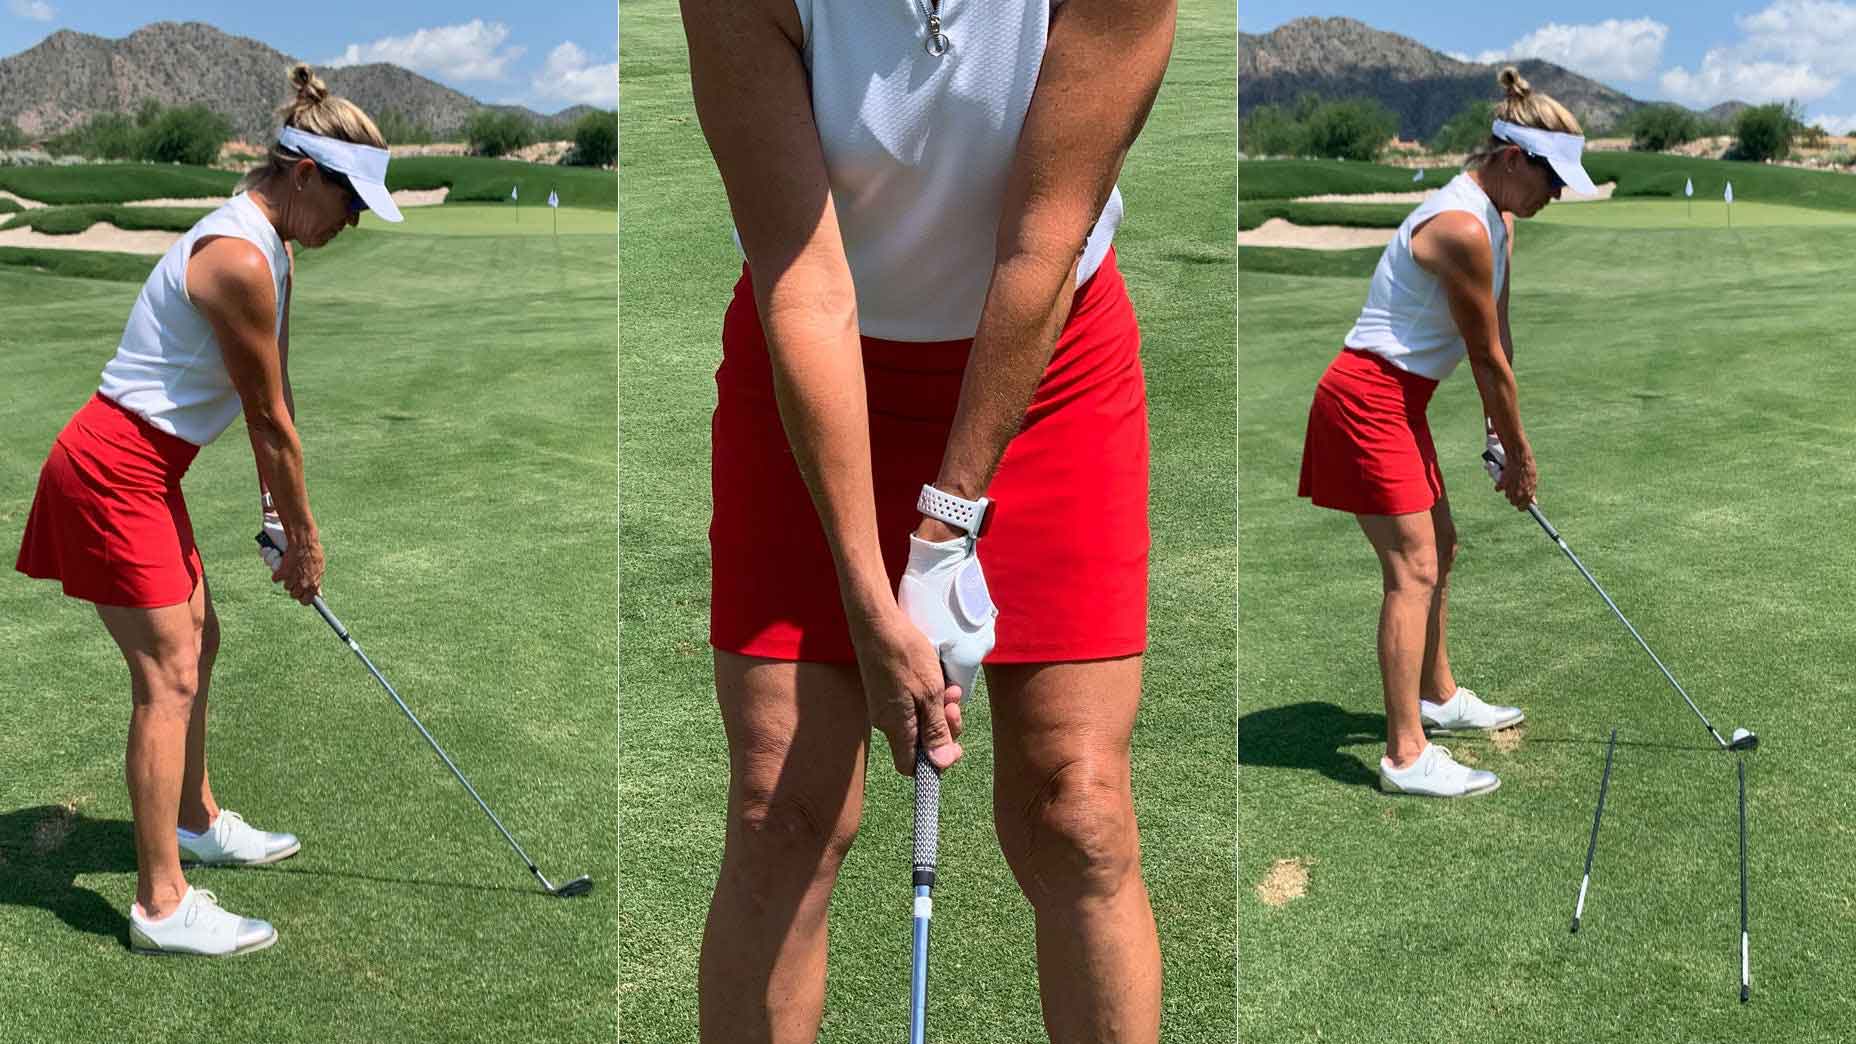 This was the most-read women's golf instruction story of the year